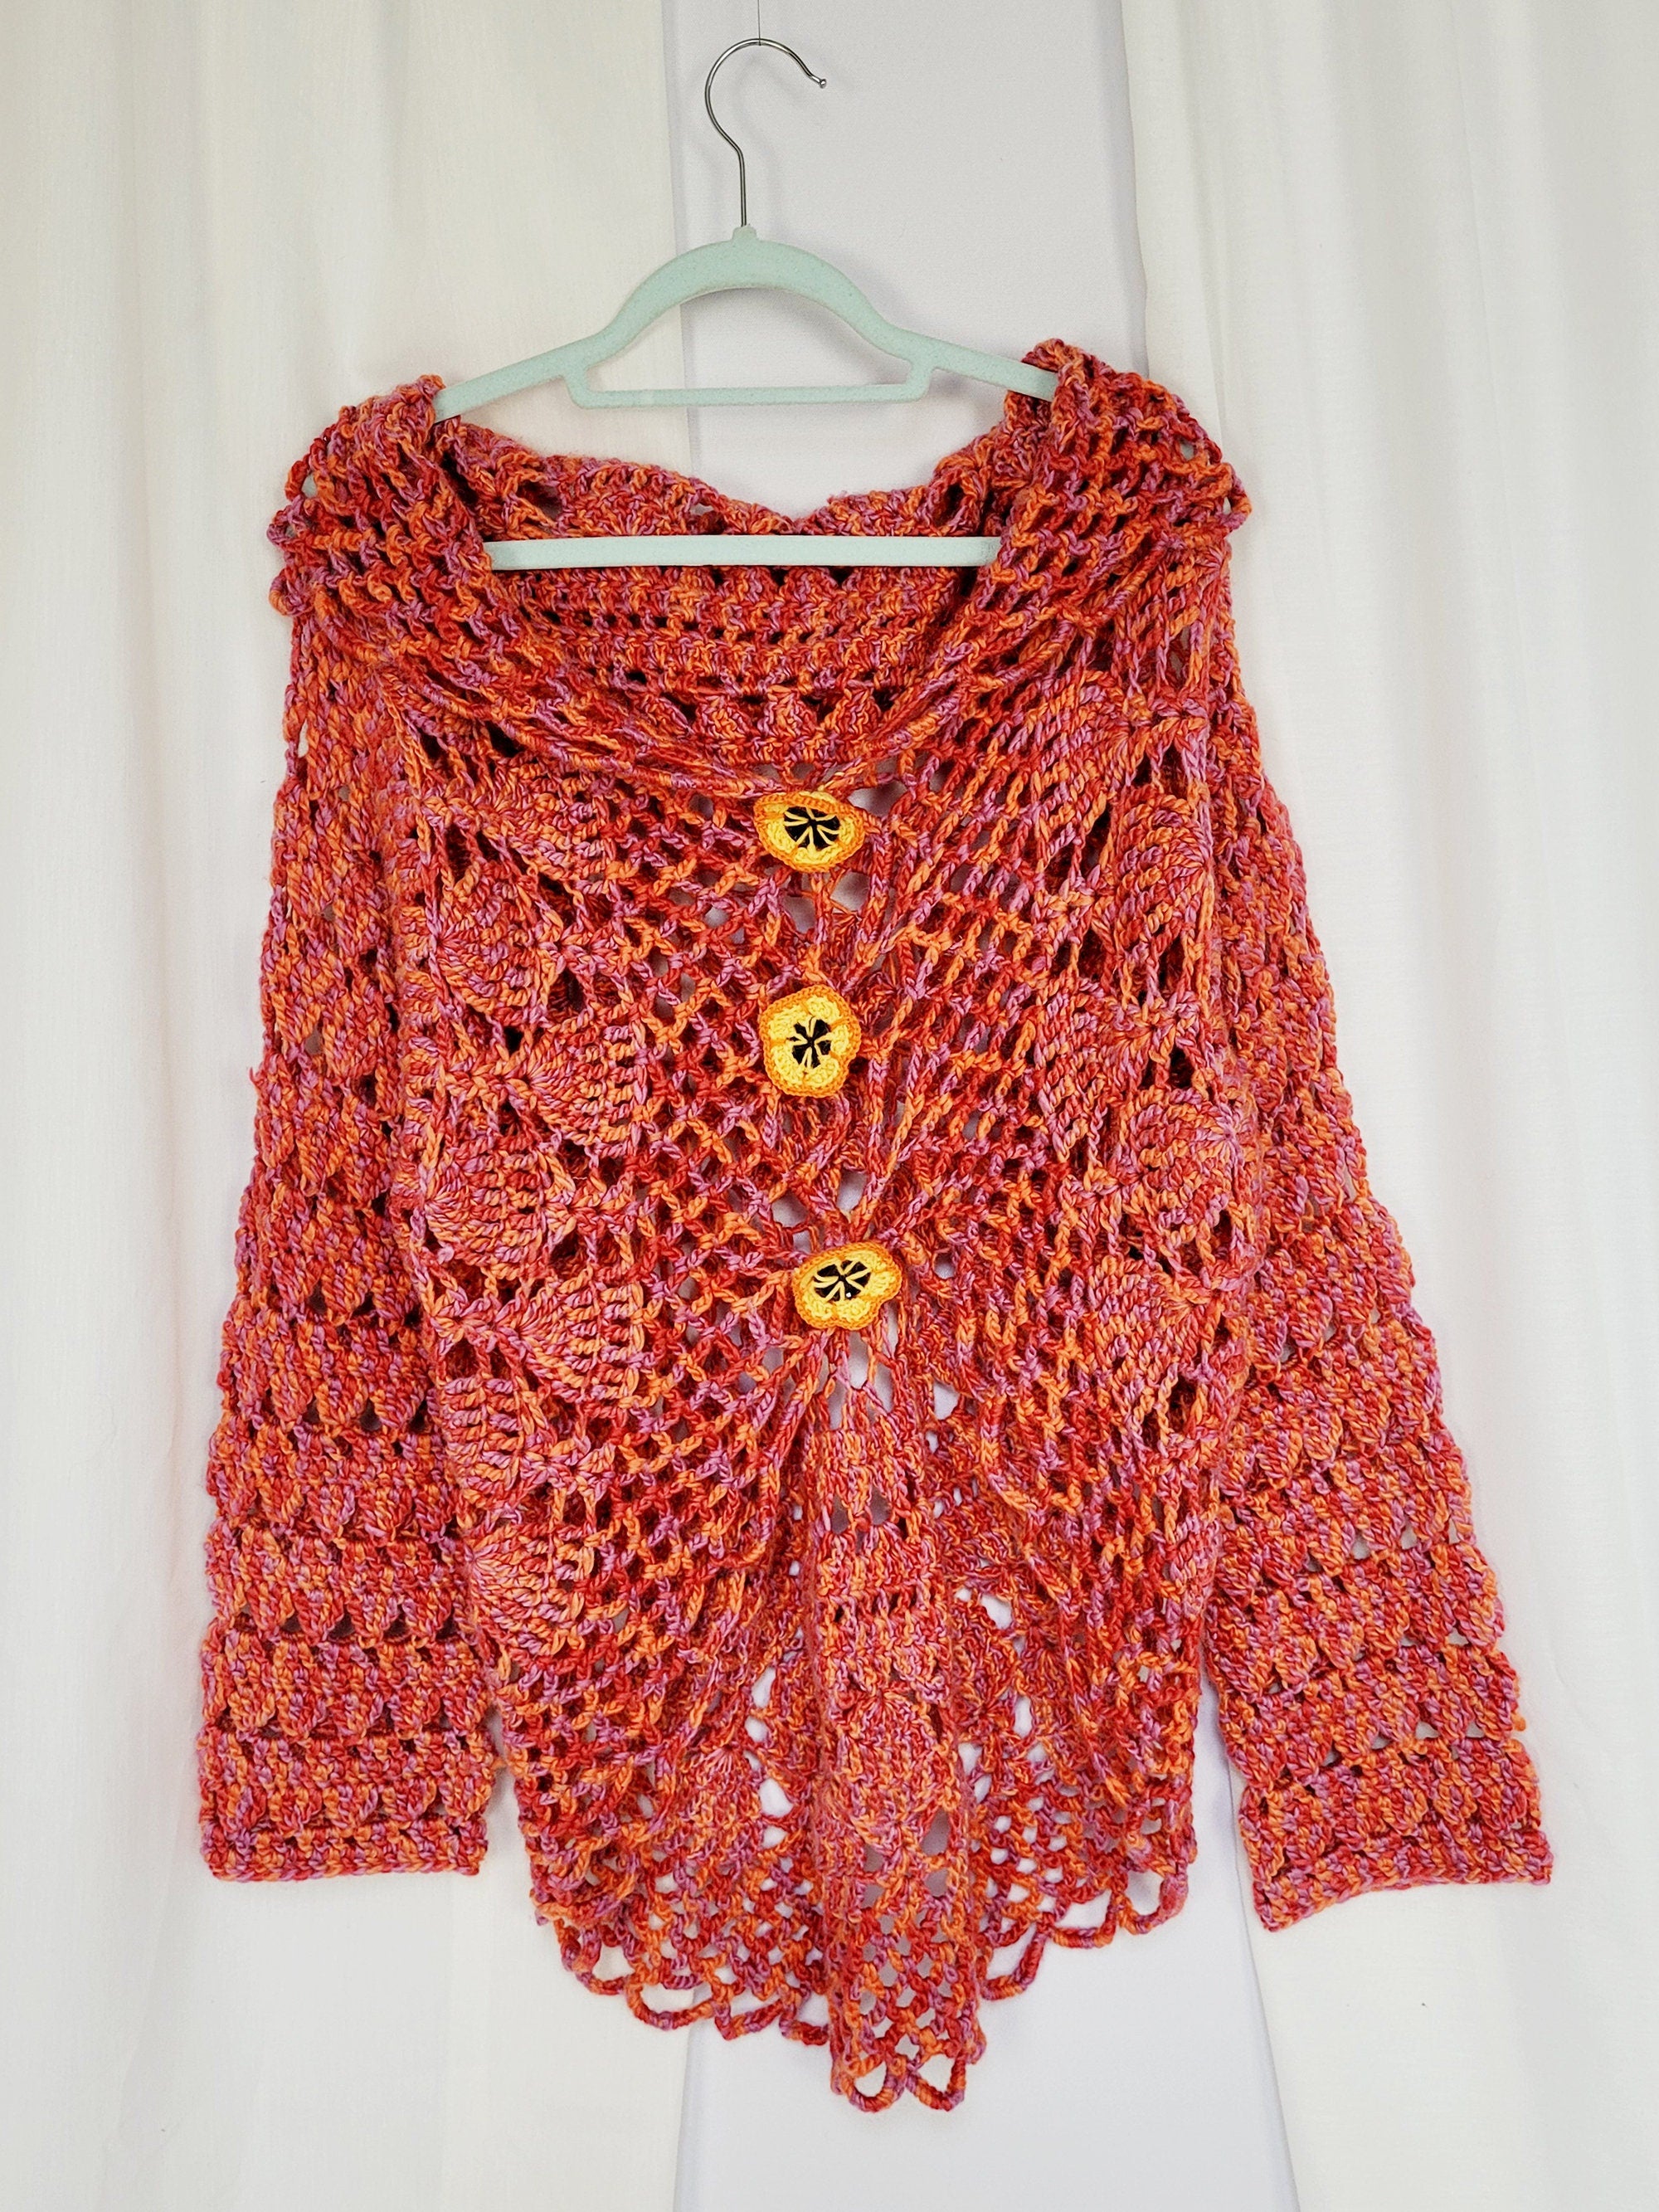 90s hand crochet knit sheer colorful pink slouchy cardigan